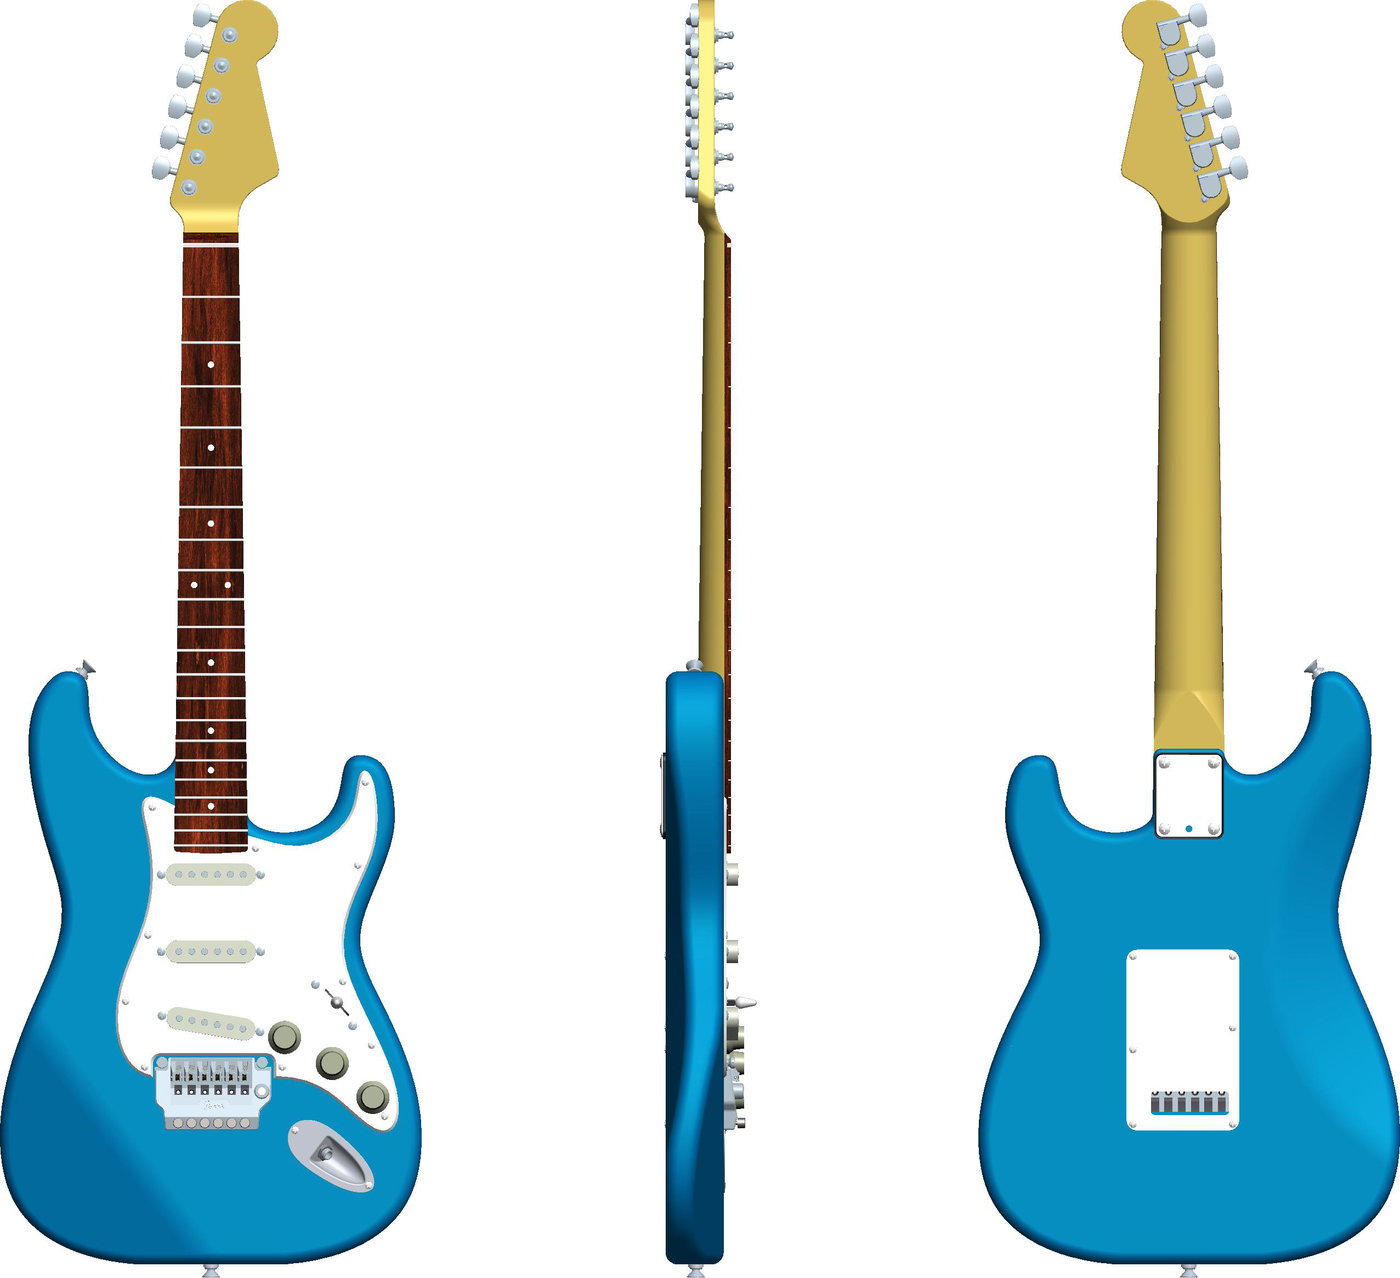 Fender Stratocaster Drawing Free download on ClipArtMag